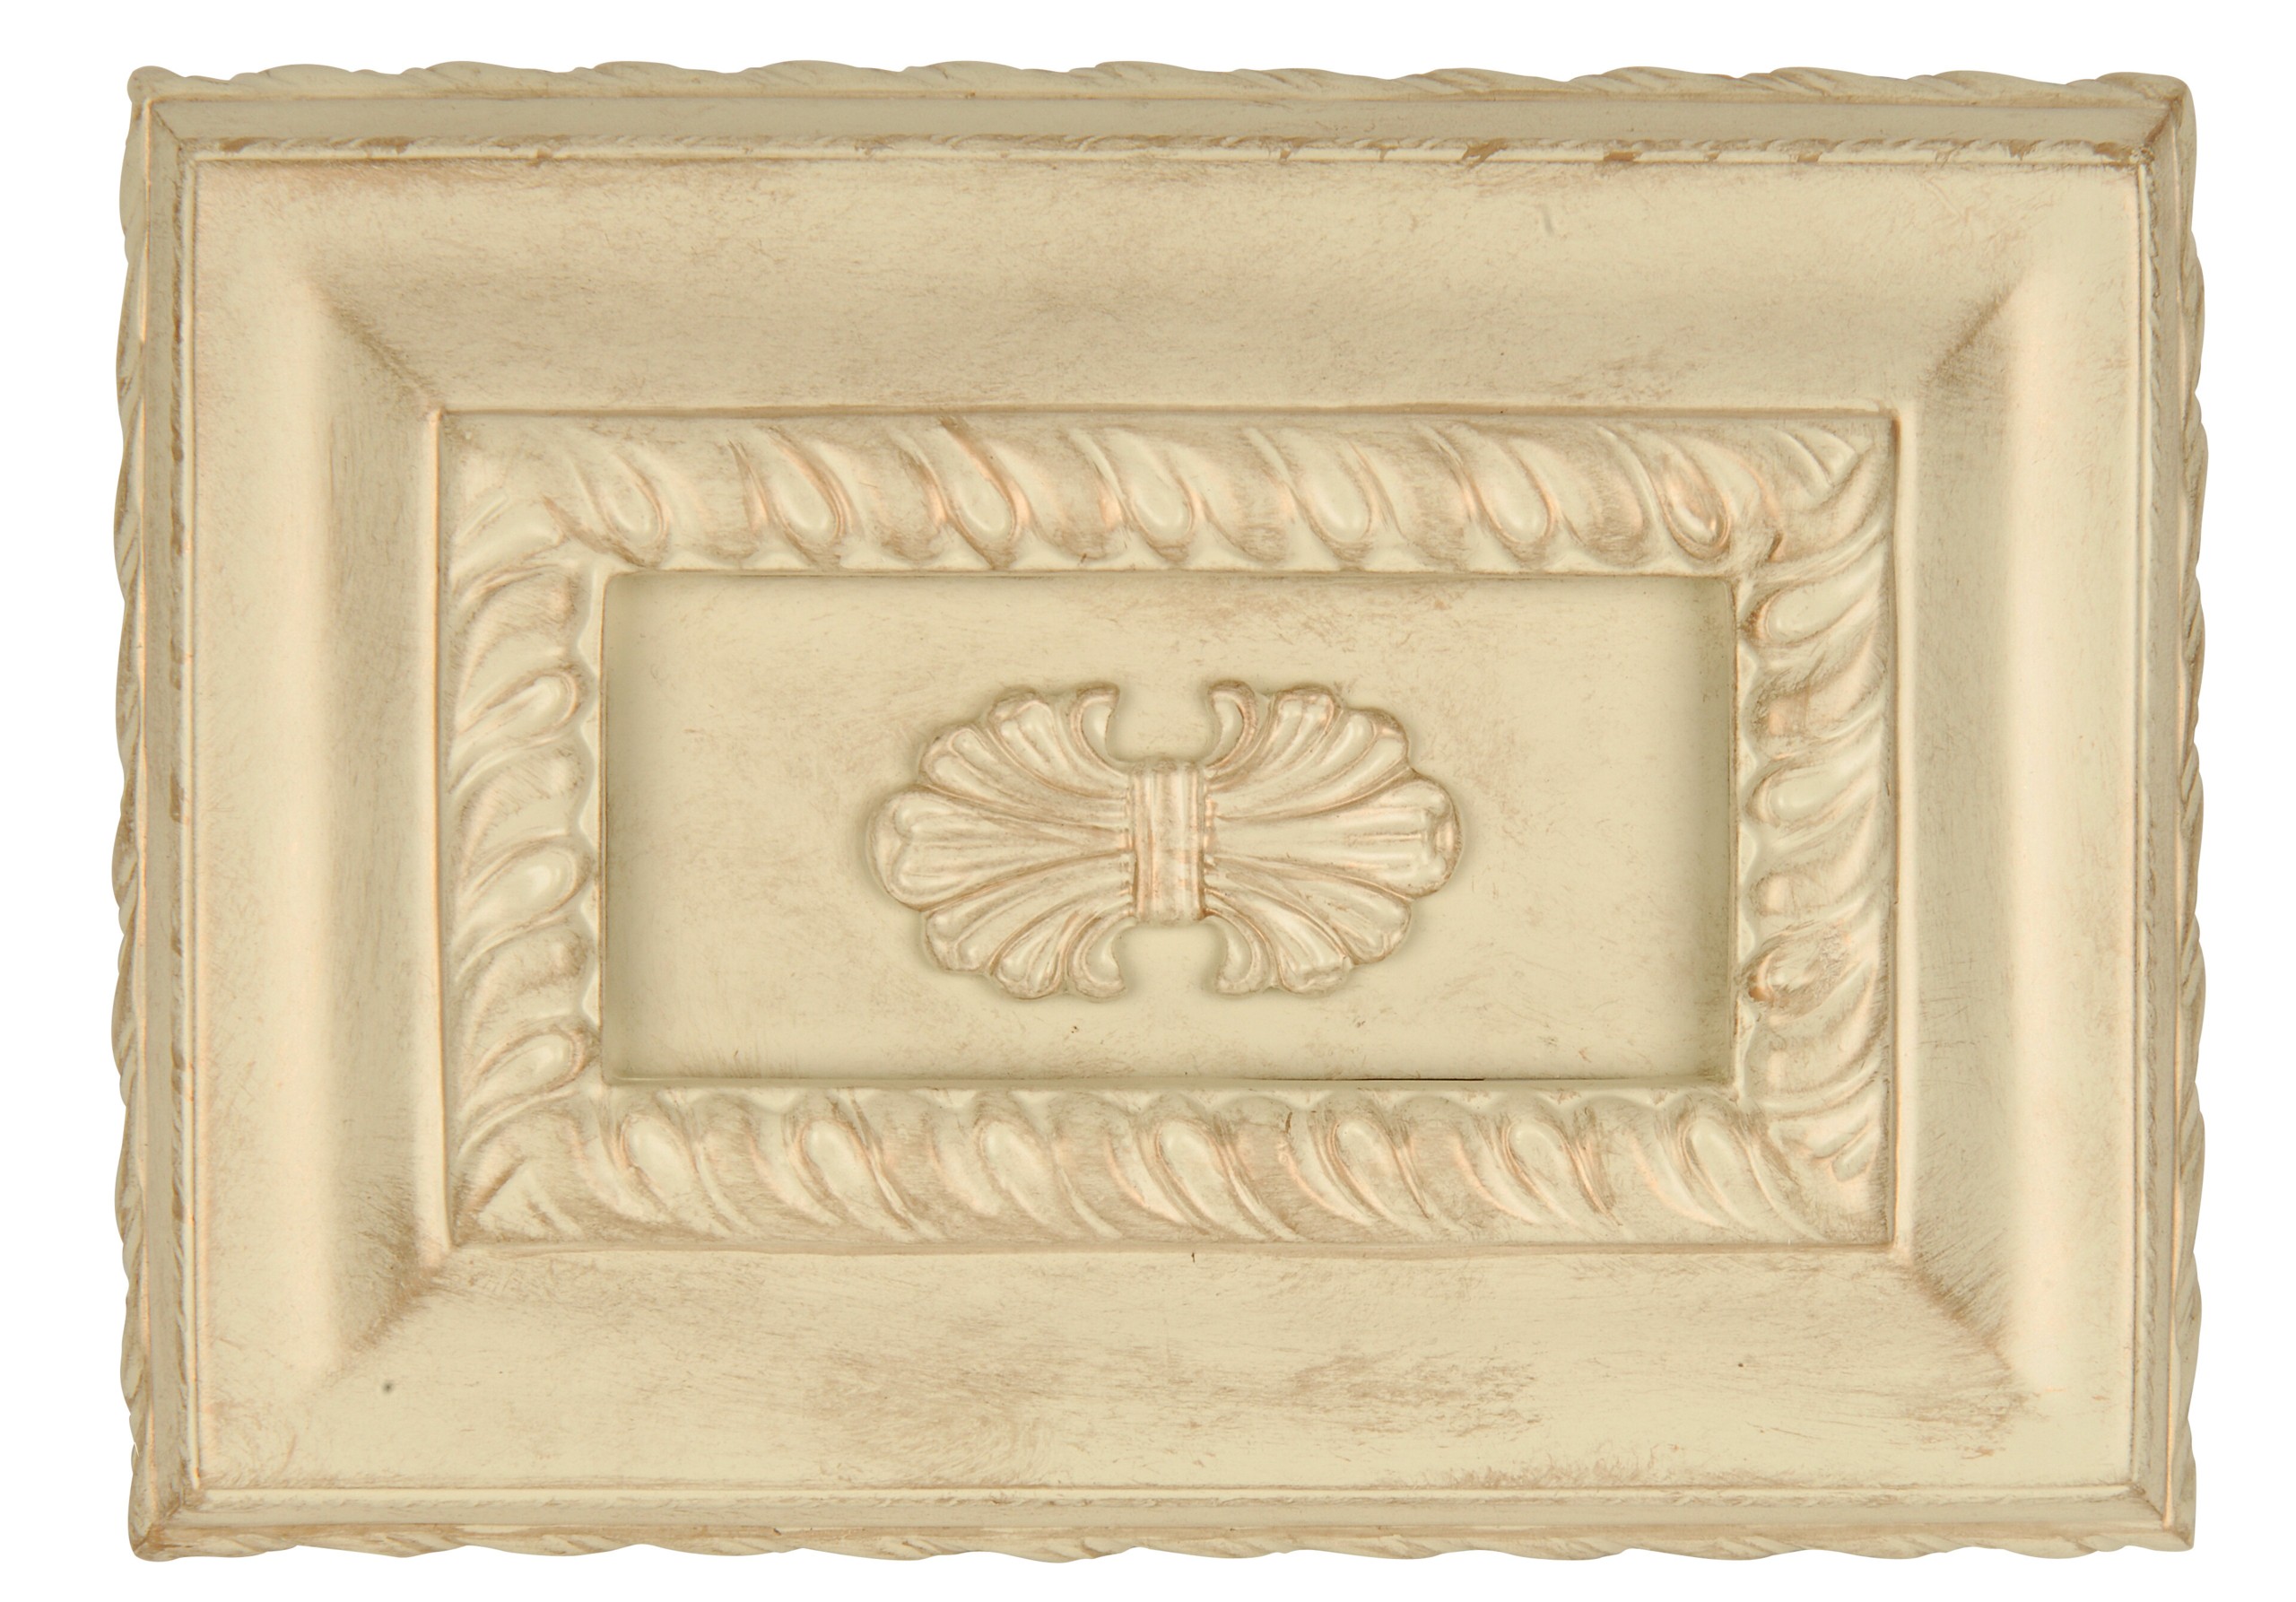 Hand Carved Rectangle Door Chime in Antique White Distressed